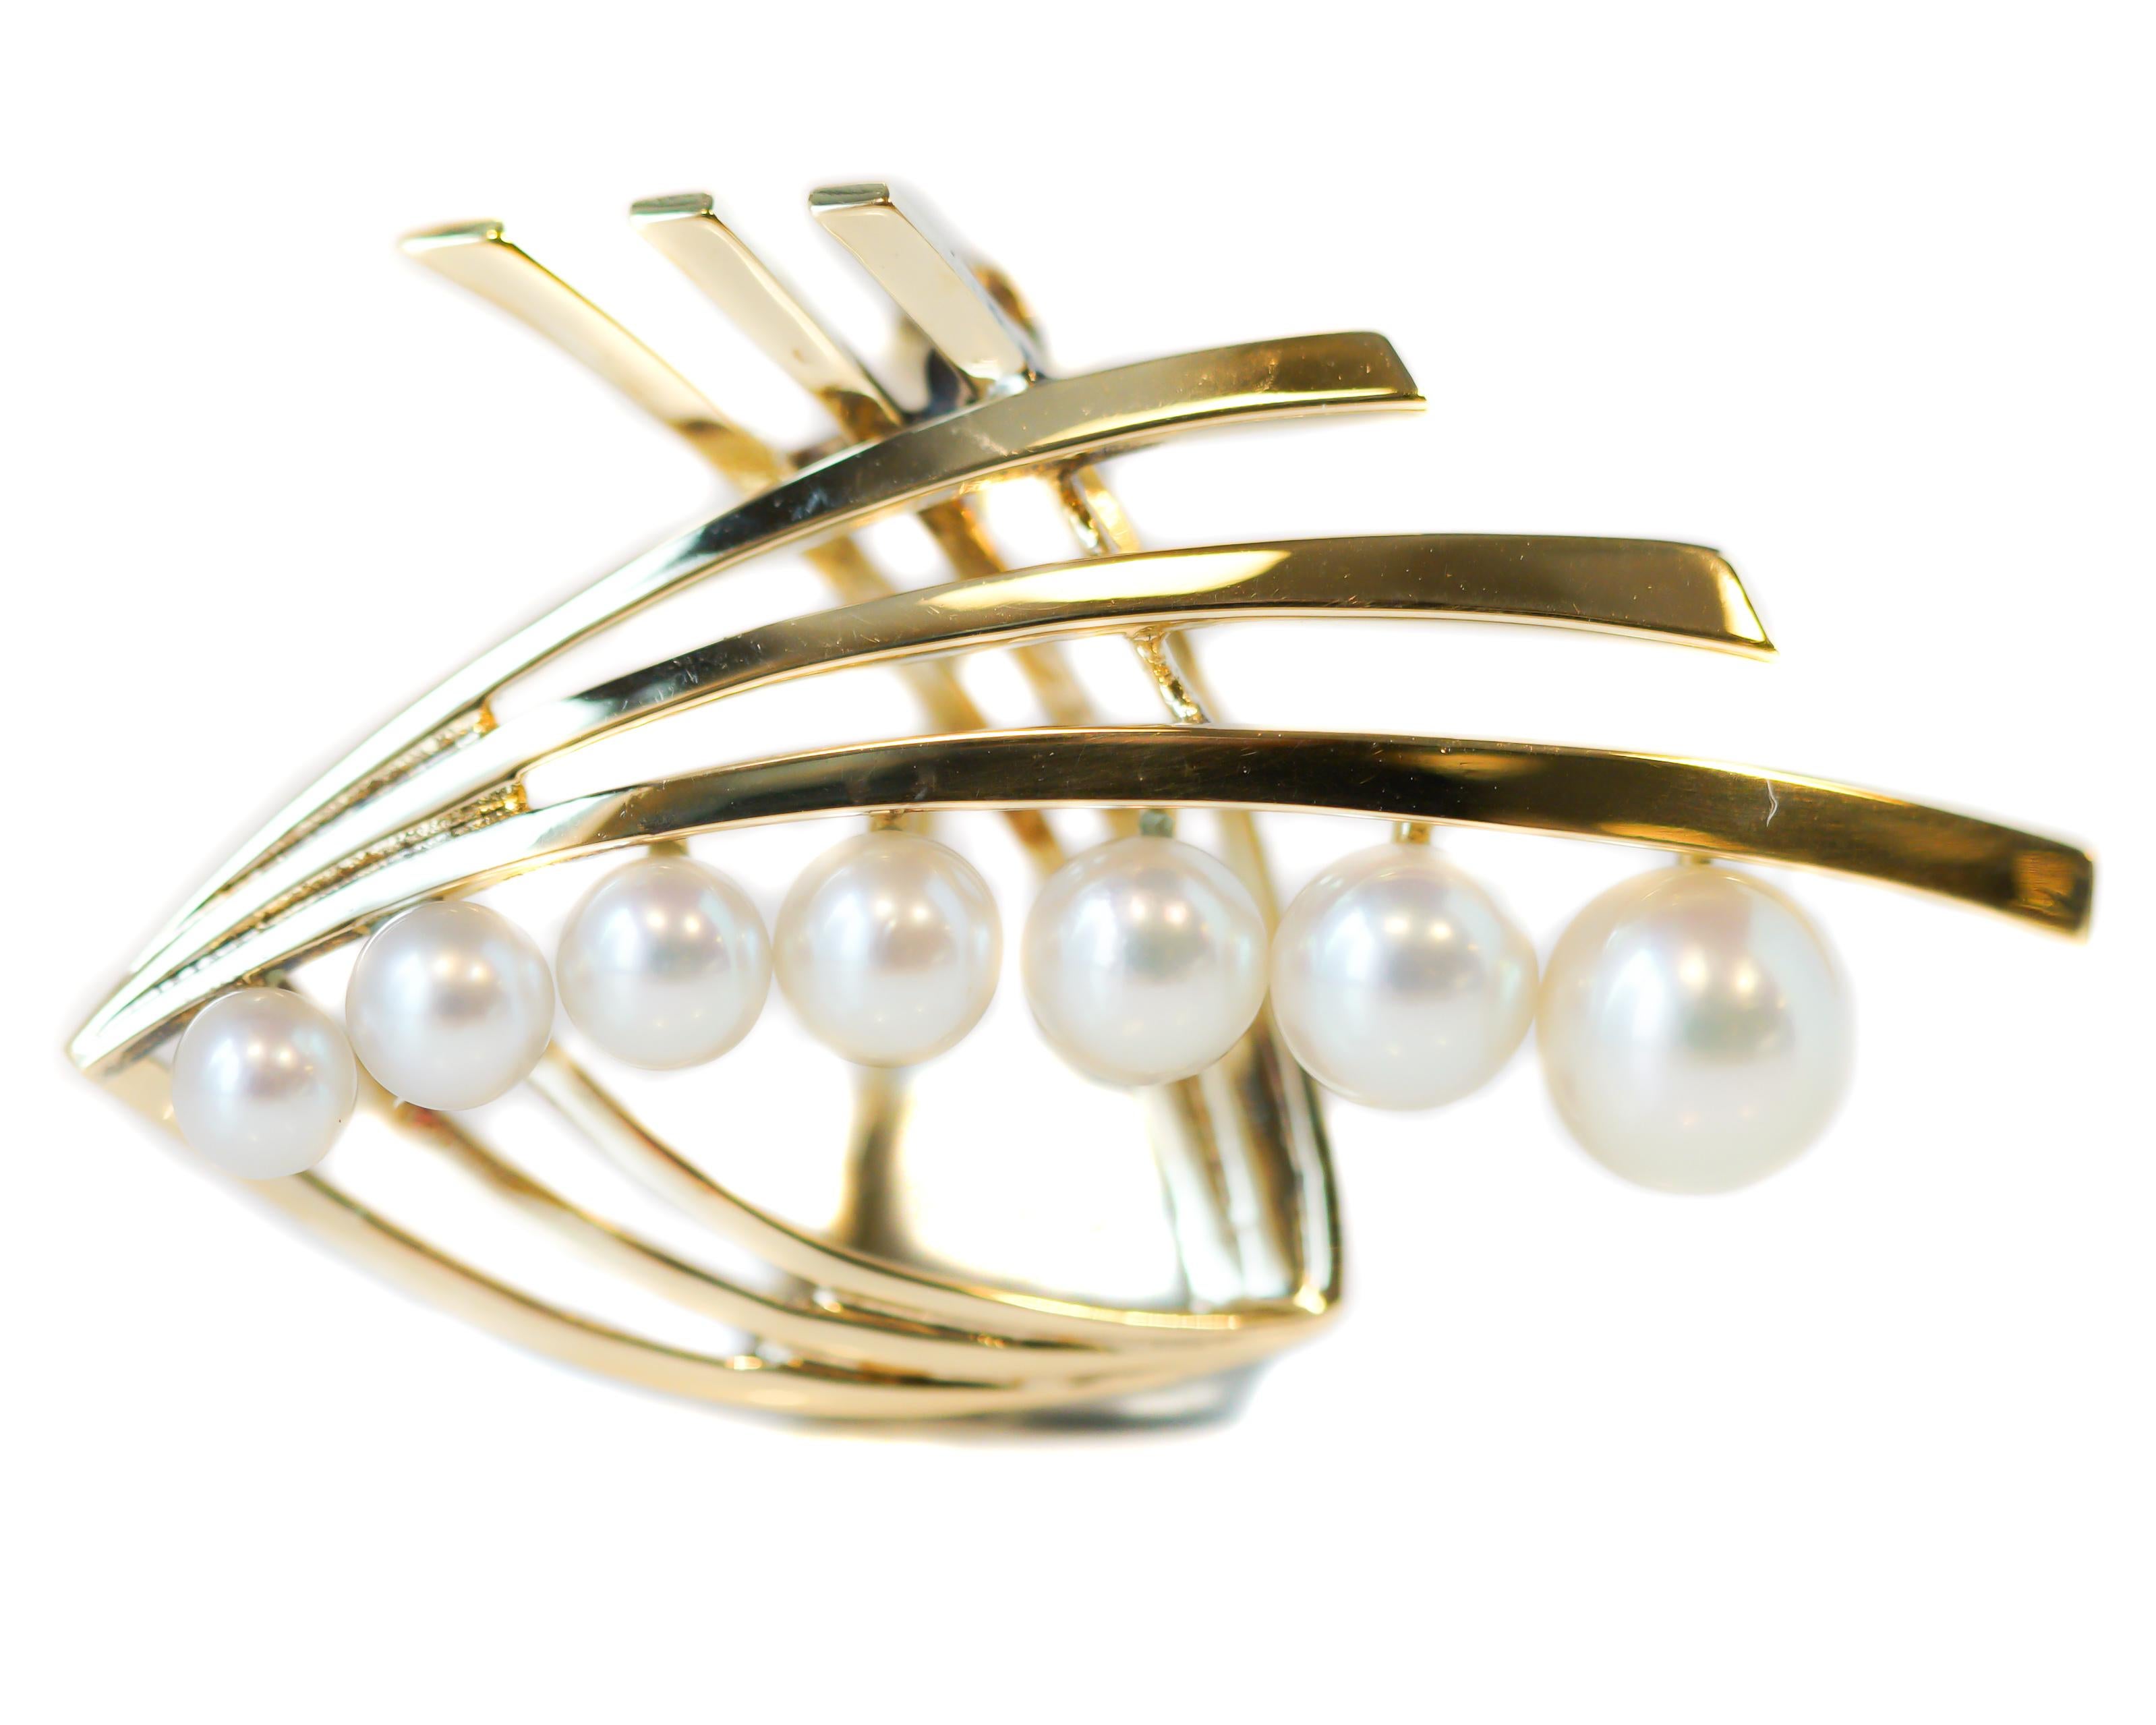 Mikimoto Pearl Brooch - 14 Karat Yellow Gold, Pearls

Features:
7 lustrous white round Pearls
14 karat Yellow Gold
Pearls measure 6.5 - 3.75 millimeters
Brooch measures 41 x 28 millimeters
Hallmark M.K14 on back of gold strand

Brooch